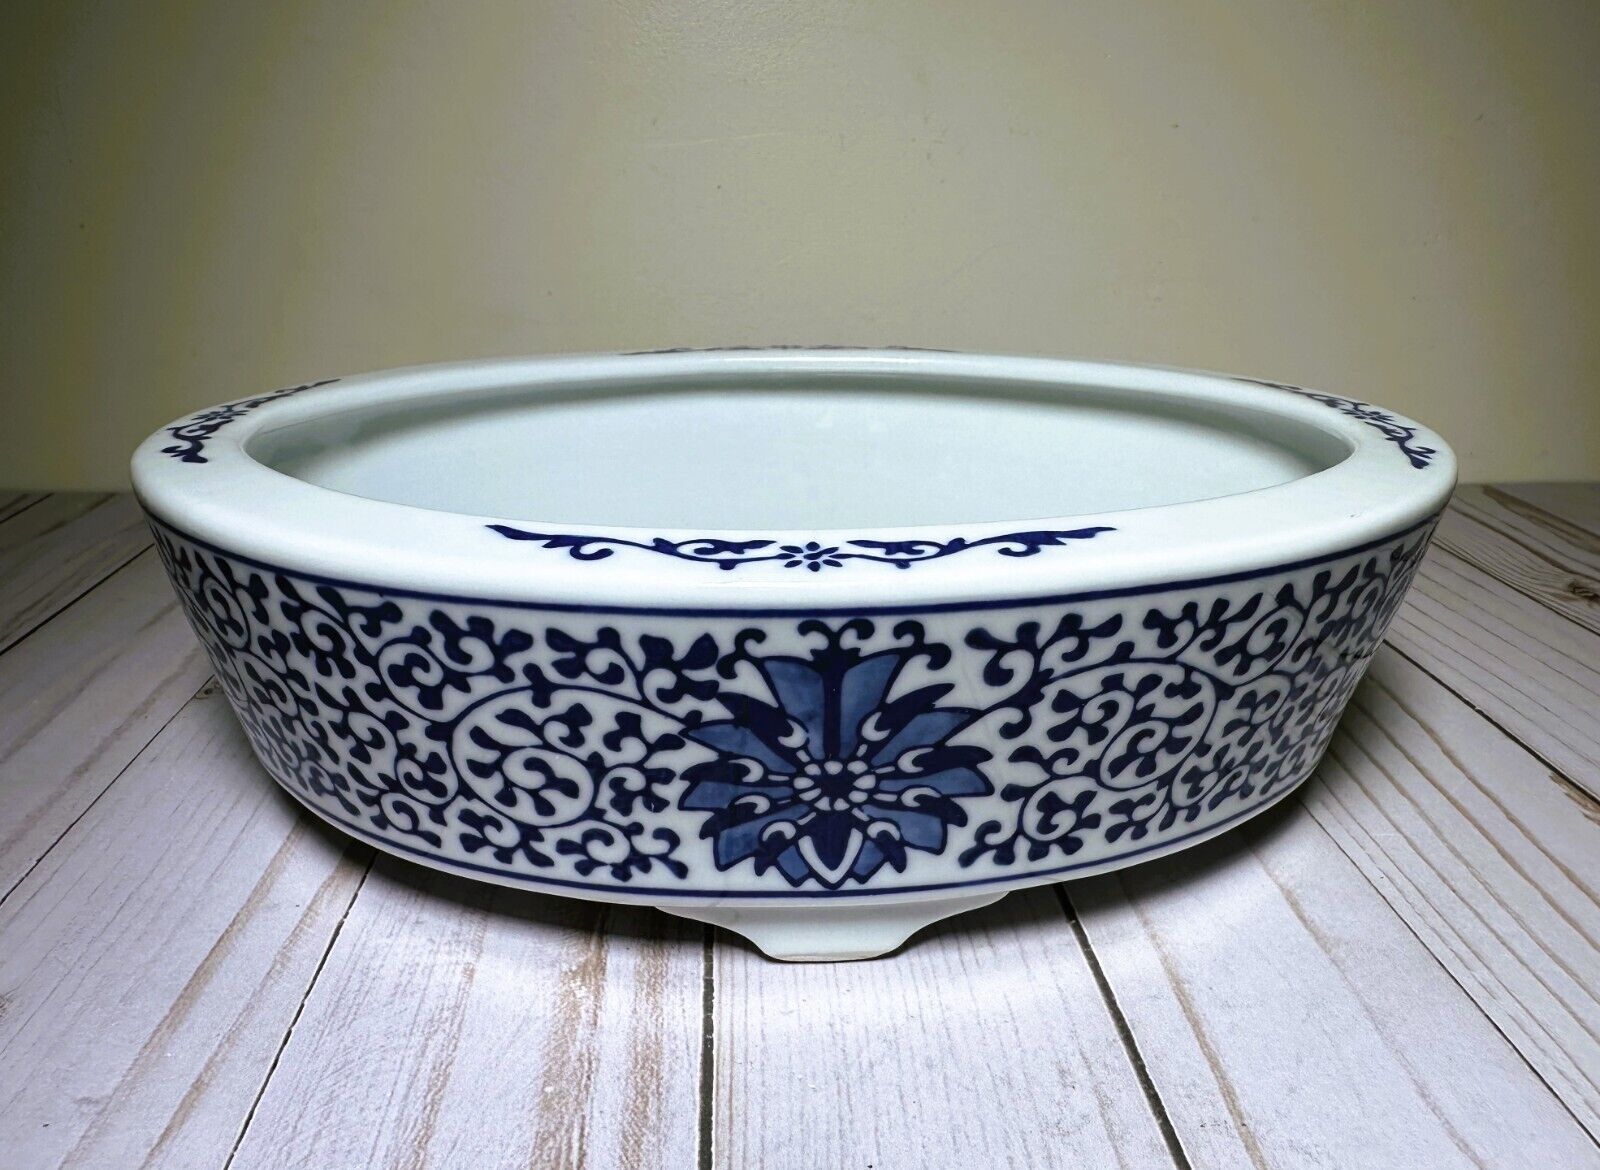 BEAUTIFUL CHINESE FOOTED OVAL BOWL/PLANTER BLUE AND WHITE FLORAL UNIQUE